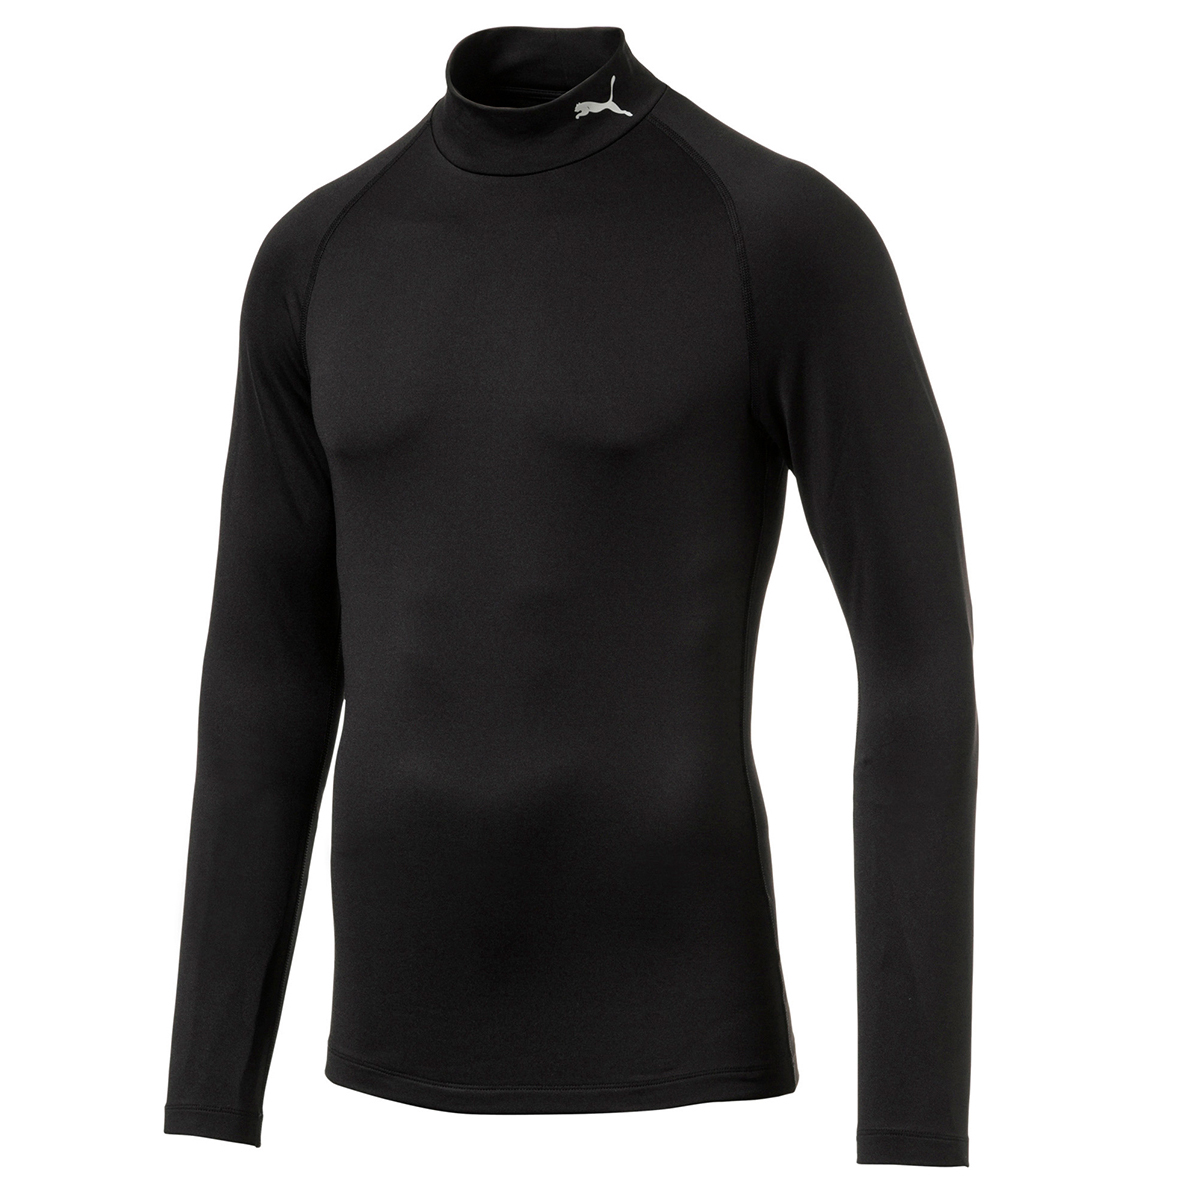 PUMA Men's WarmCELL Golf Base Layer from american golf